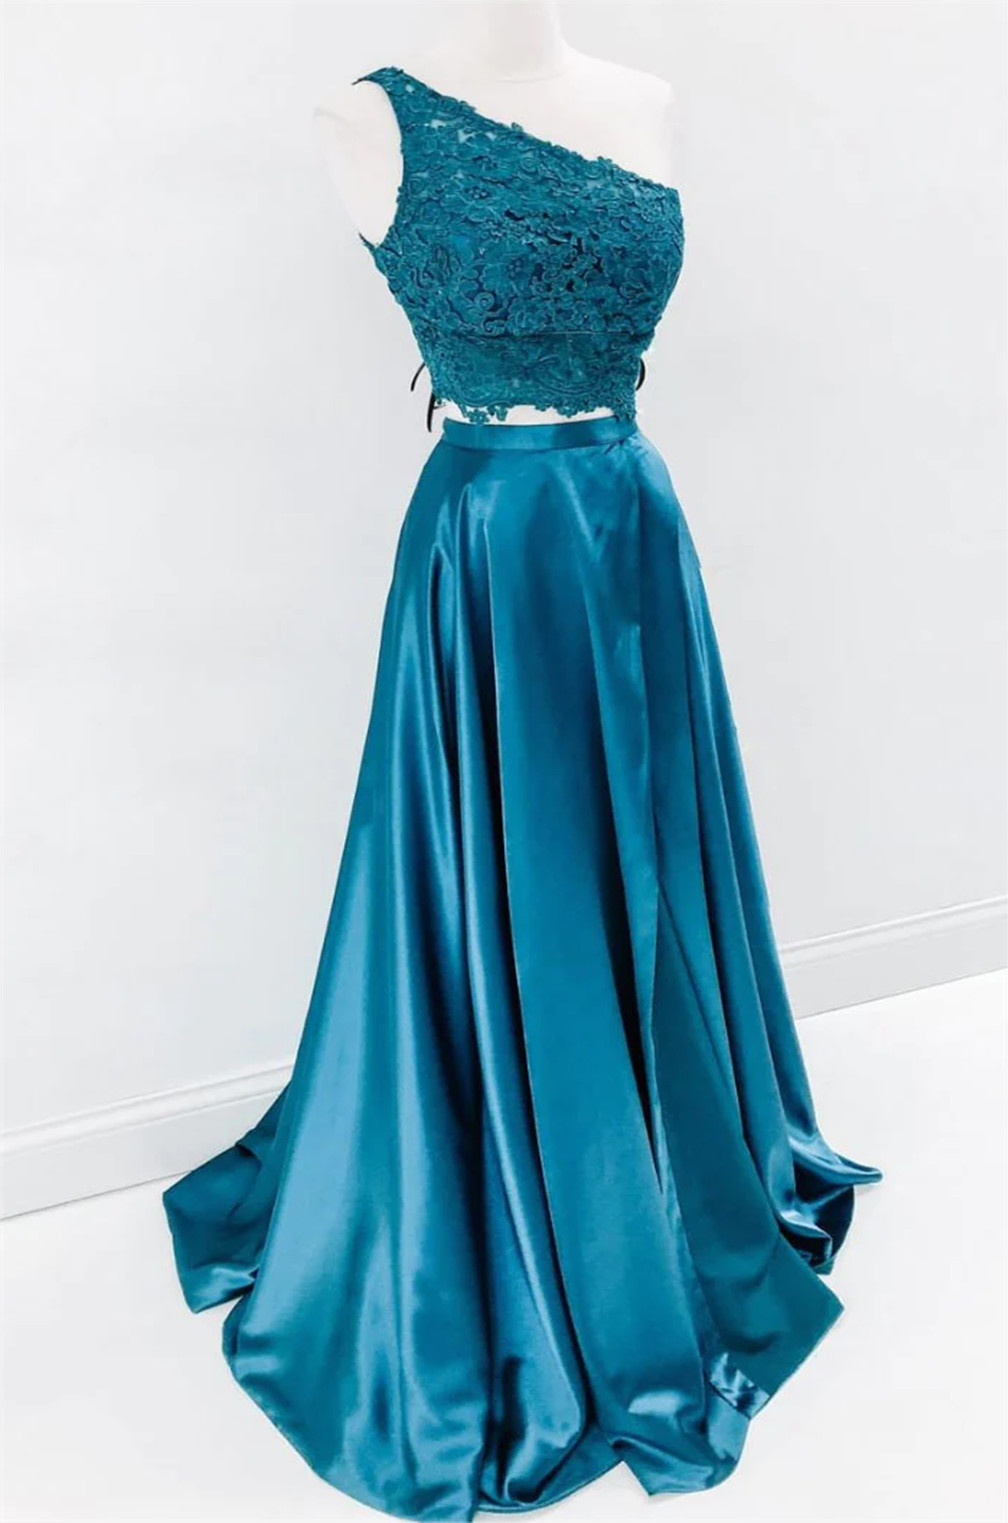 Women A-line Satin Lace Prom Dresses Long Appliques Evening Party Gowns Sleeveless Formal Dress Yp124